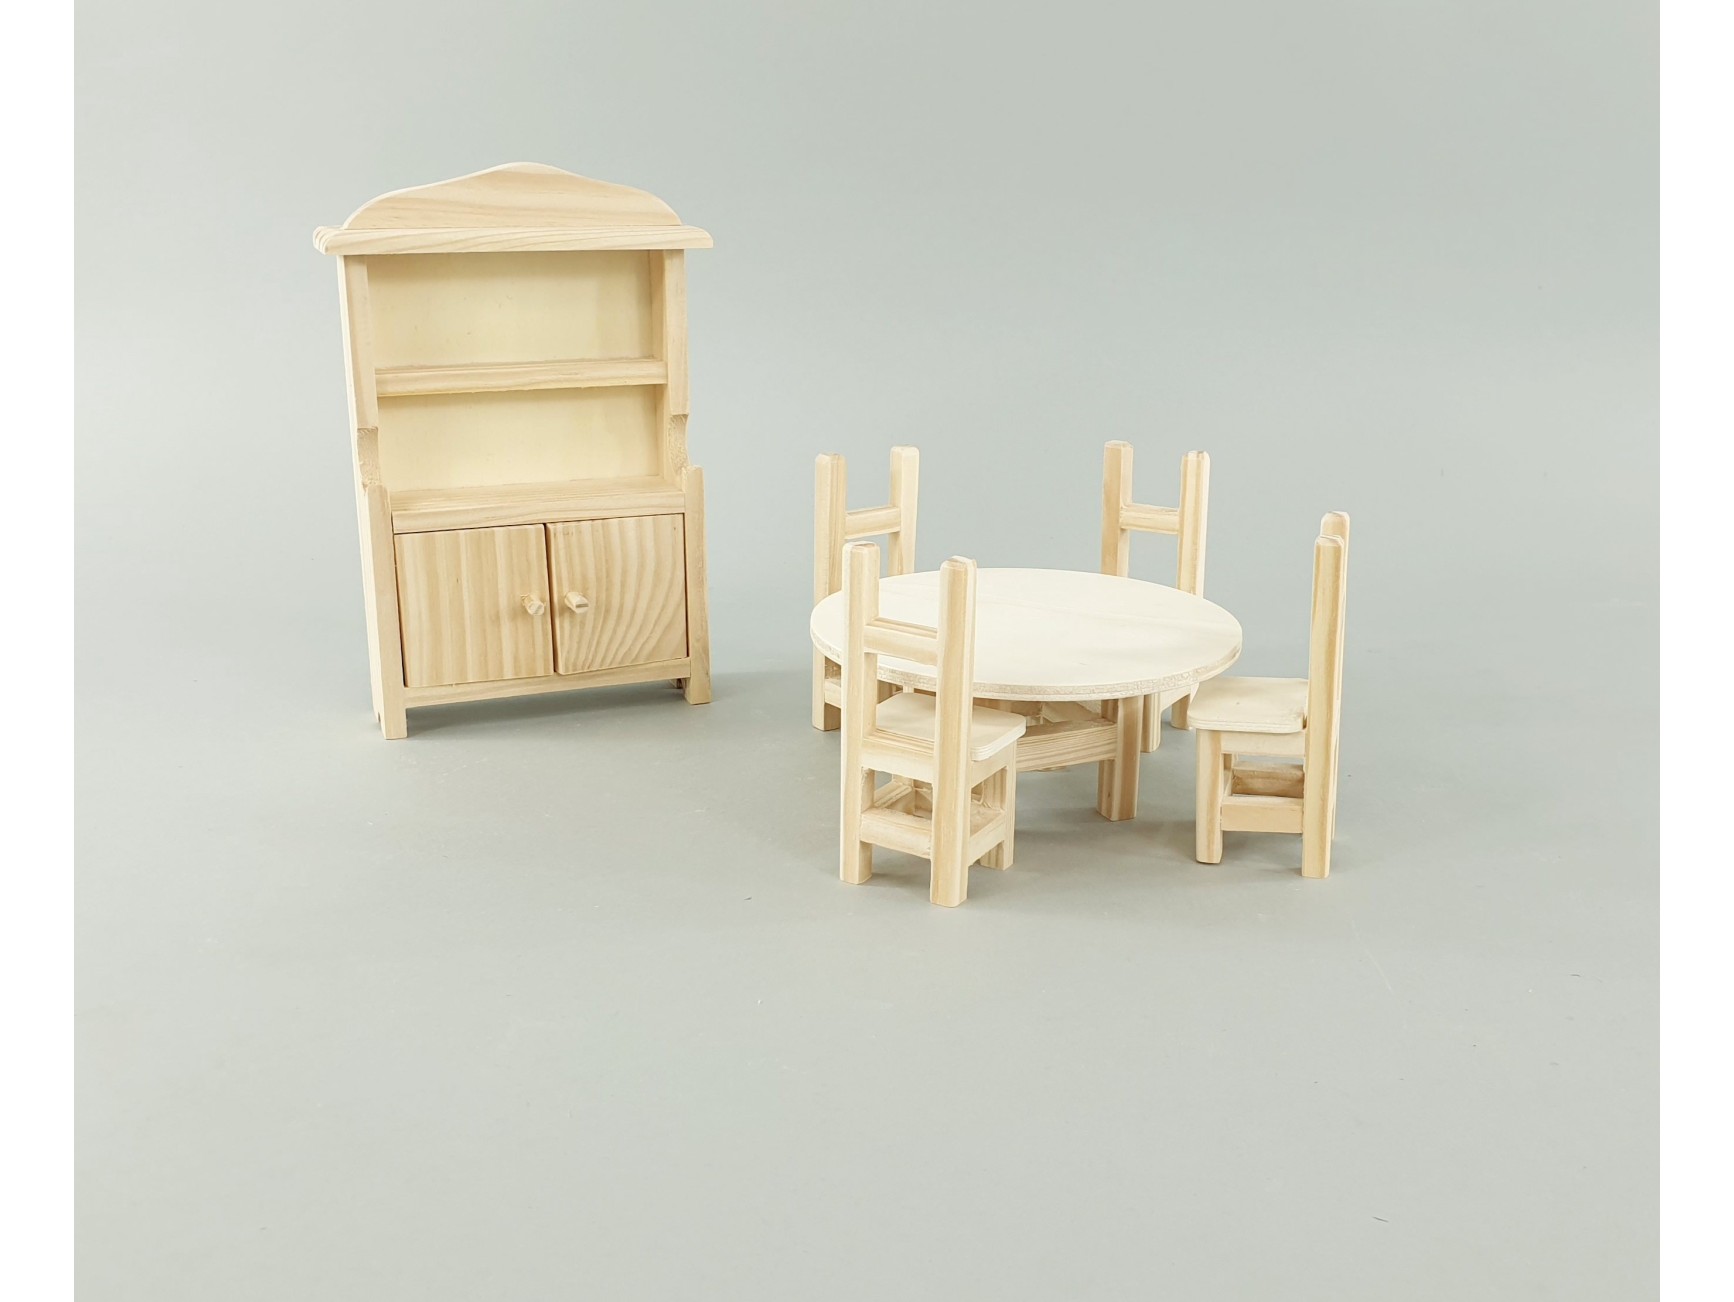 Silla infantil natural con asiento de madera Ref.AT31001 - Mabaonline